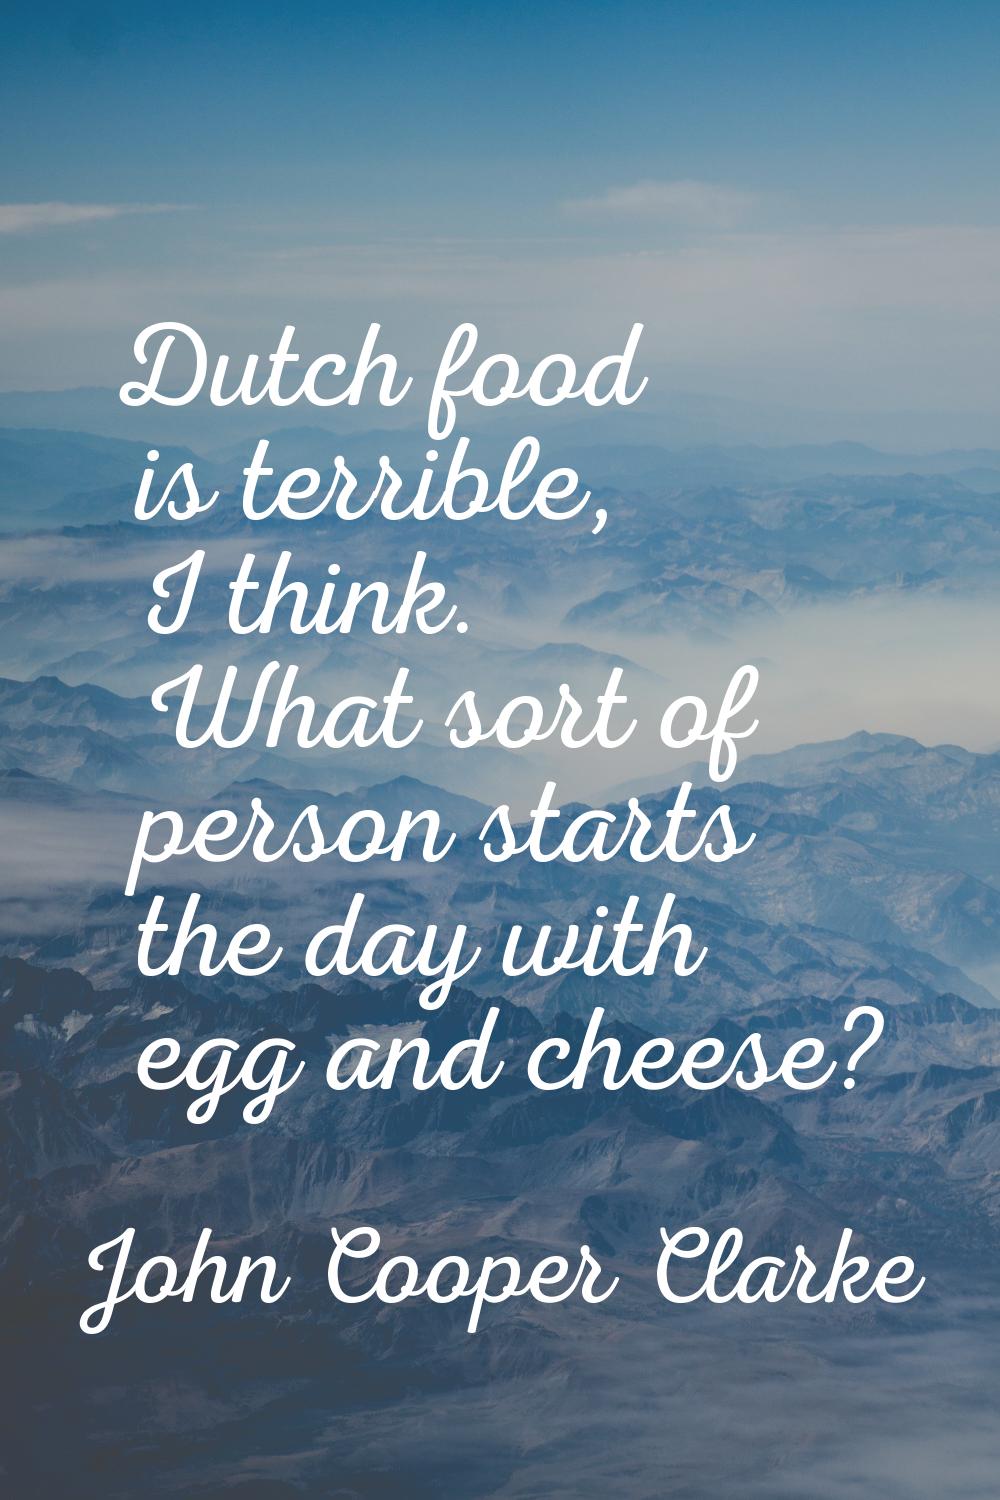 Dutch food is terrible, I think. What sort of person starts the day with egg and cheese?